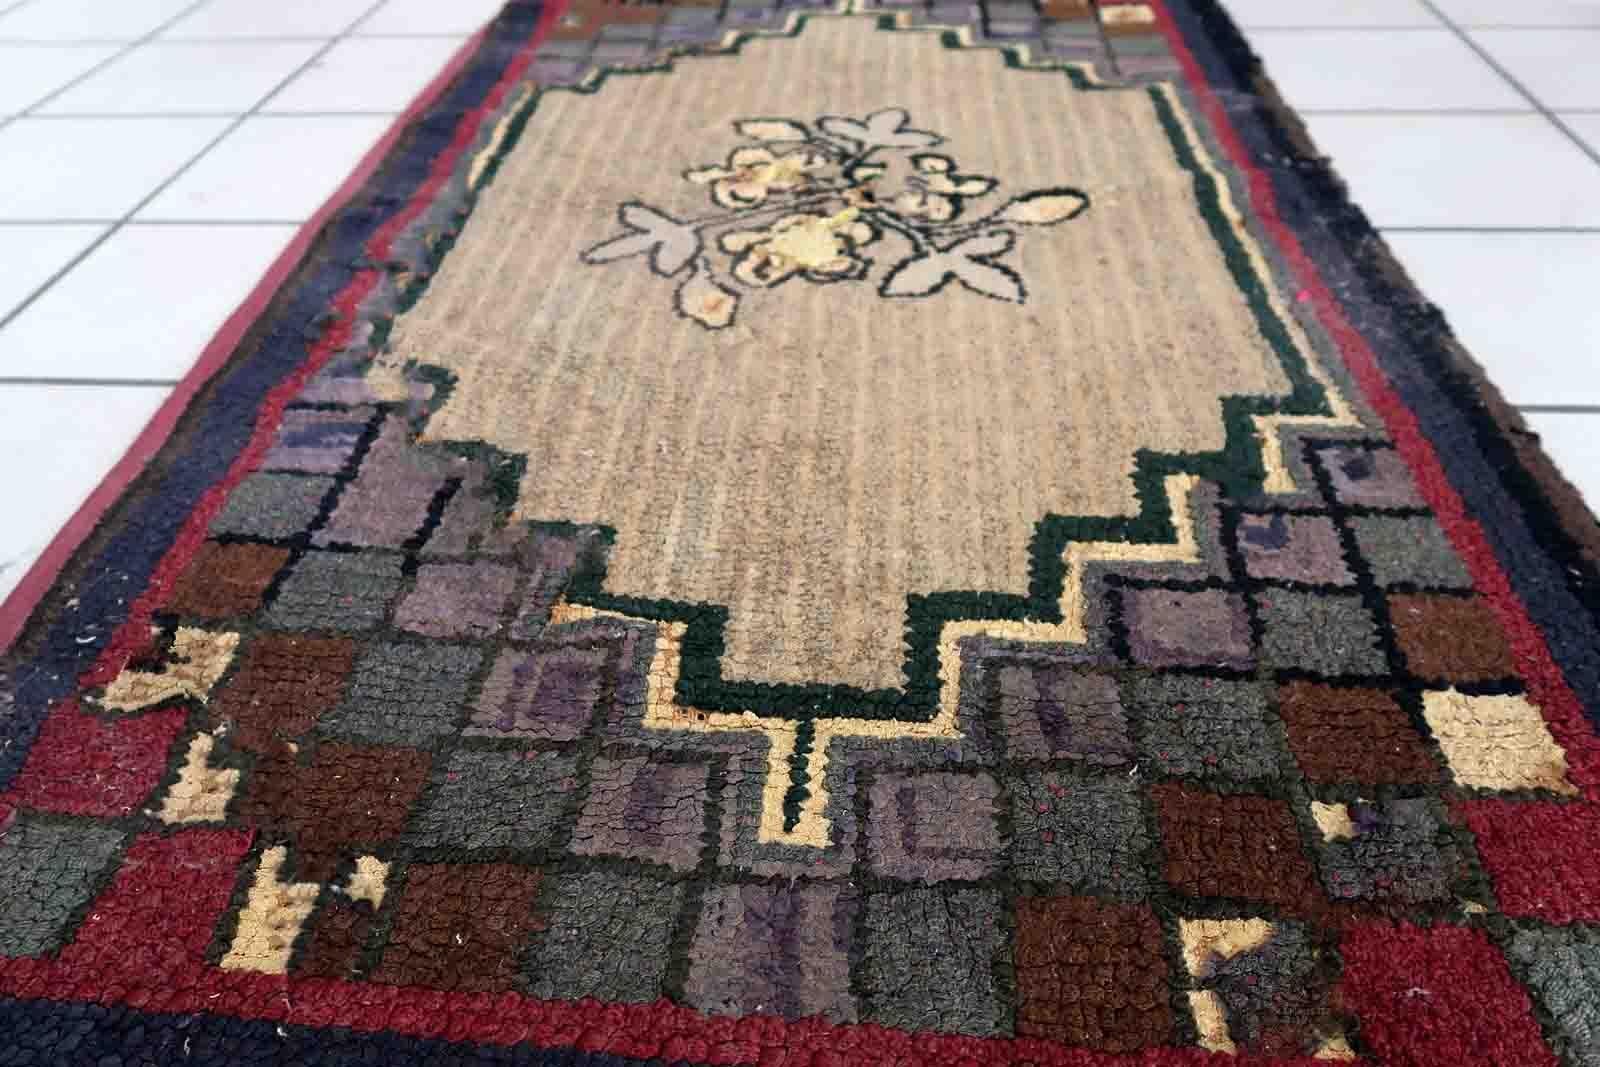 Handmade antique American Hooked rug in floral design. The rug is from the end of 19th century in good condition, the rug has old restorations.

-condition: good, restored,

-circa: 1880s,

-size: 2.1' x 4' (67cm x 122cm),

-material: